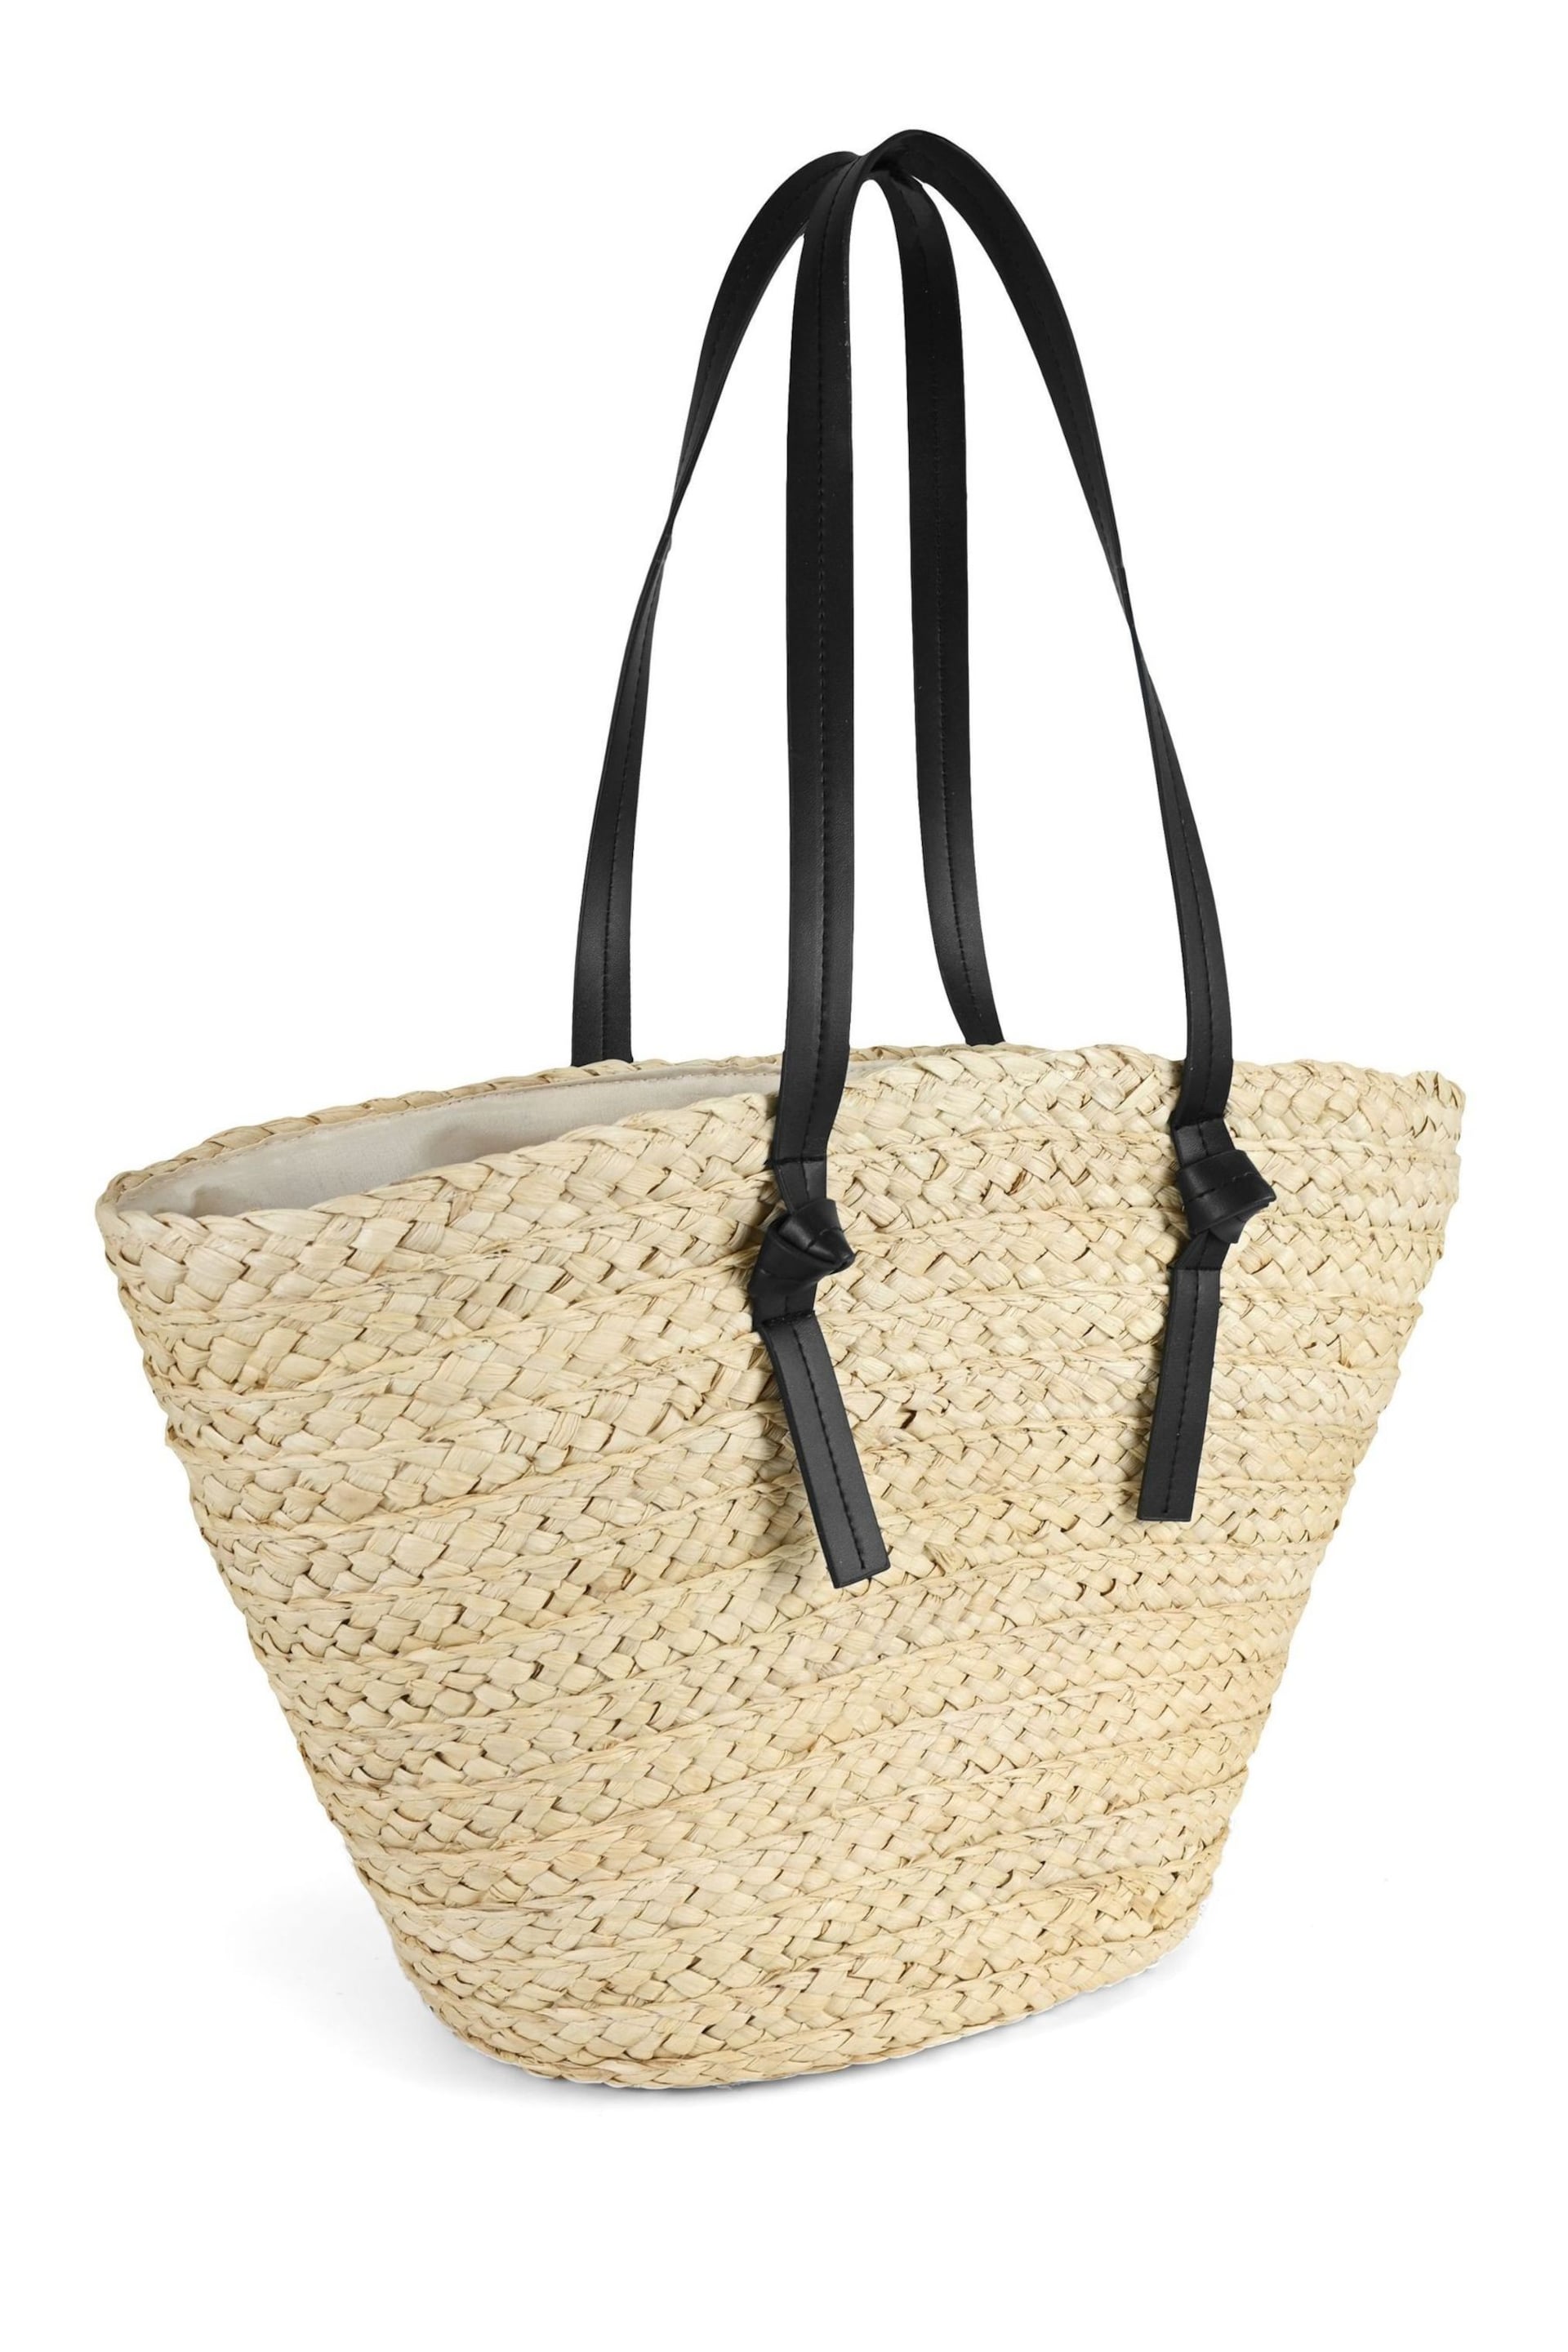 South Beach Brown Shoulder Straw Tote Bag - Image 3 of 5